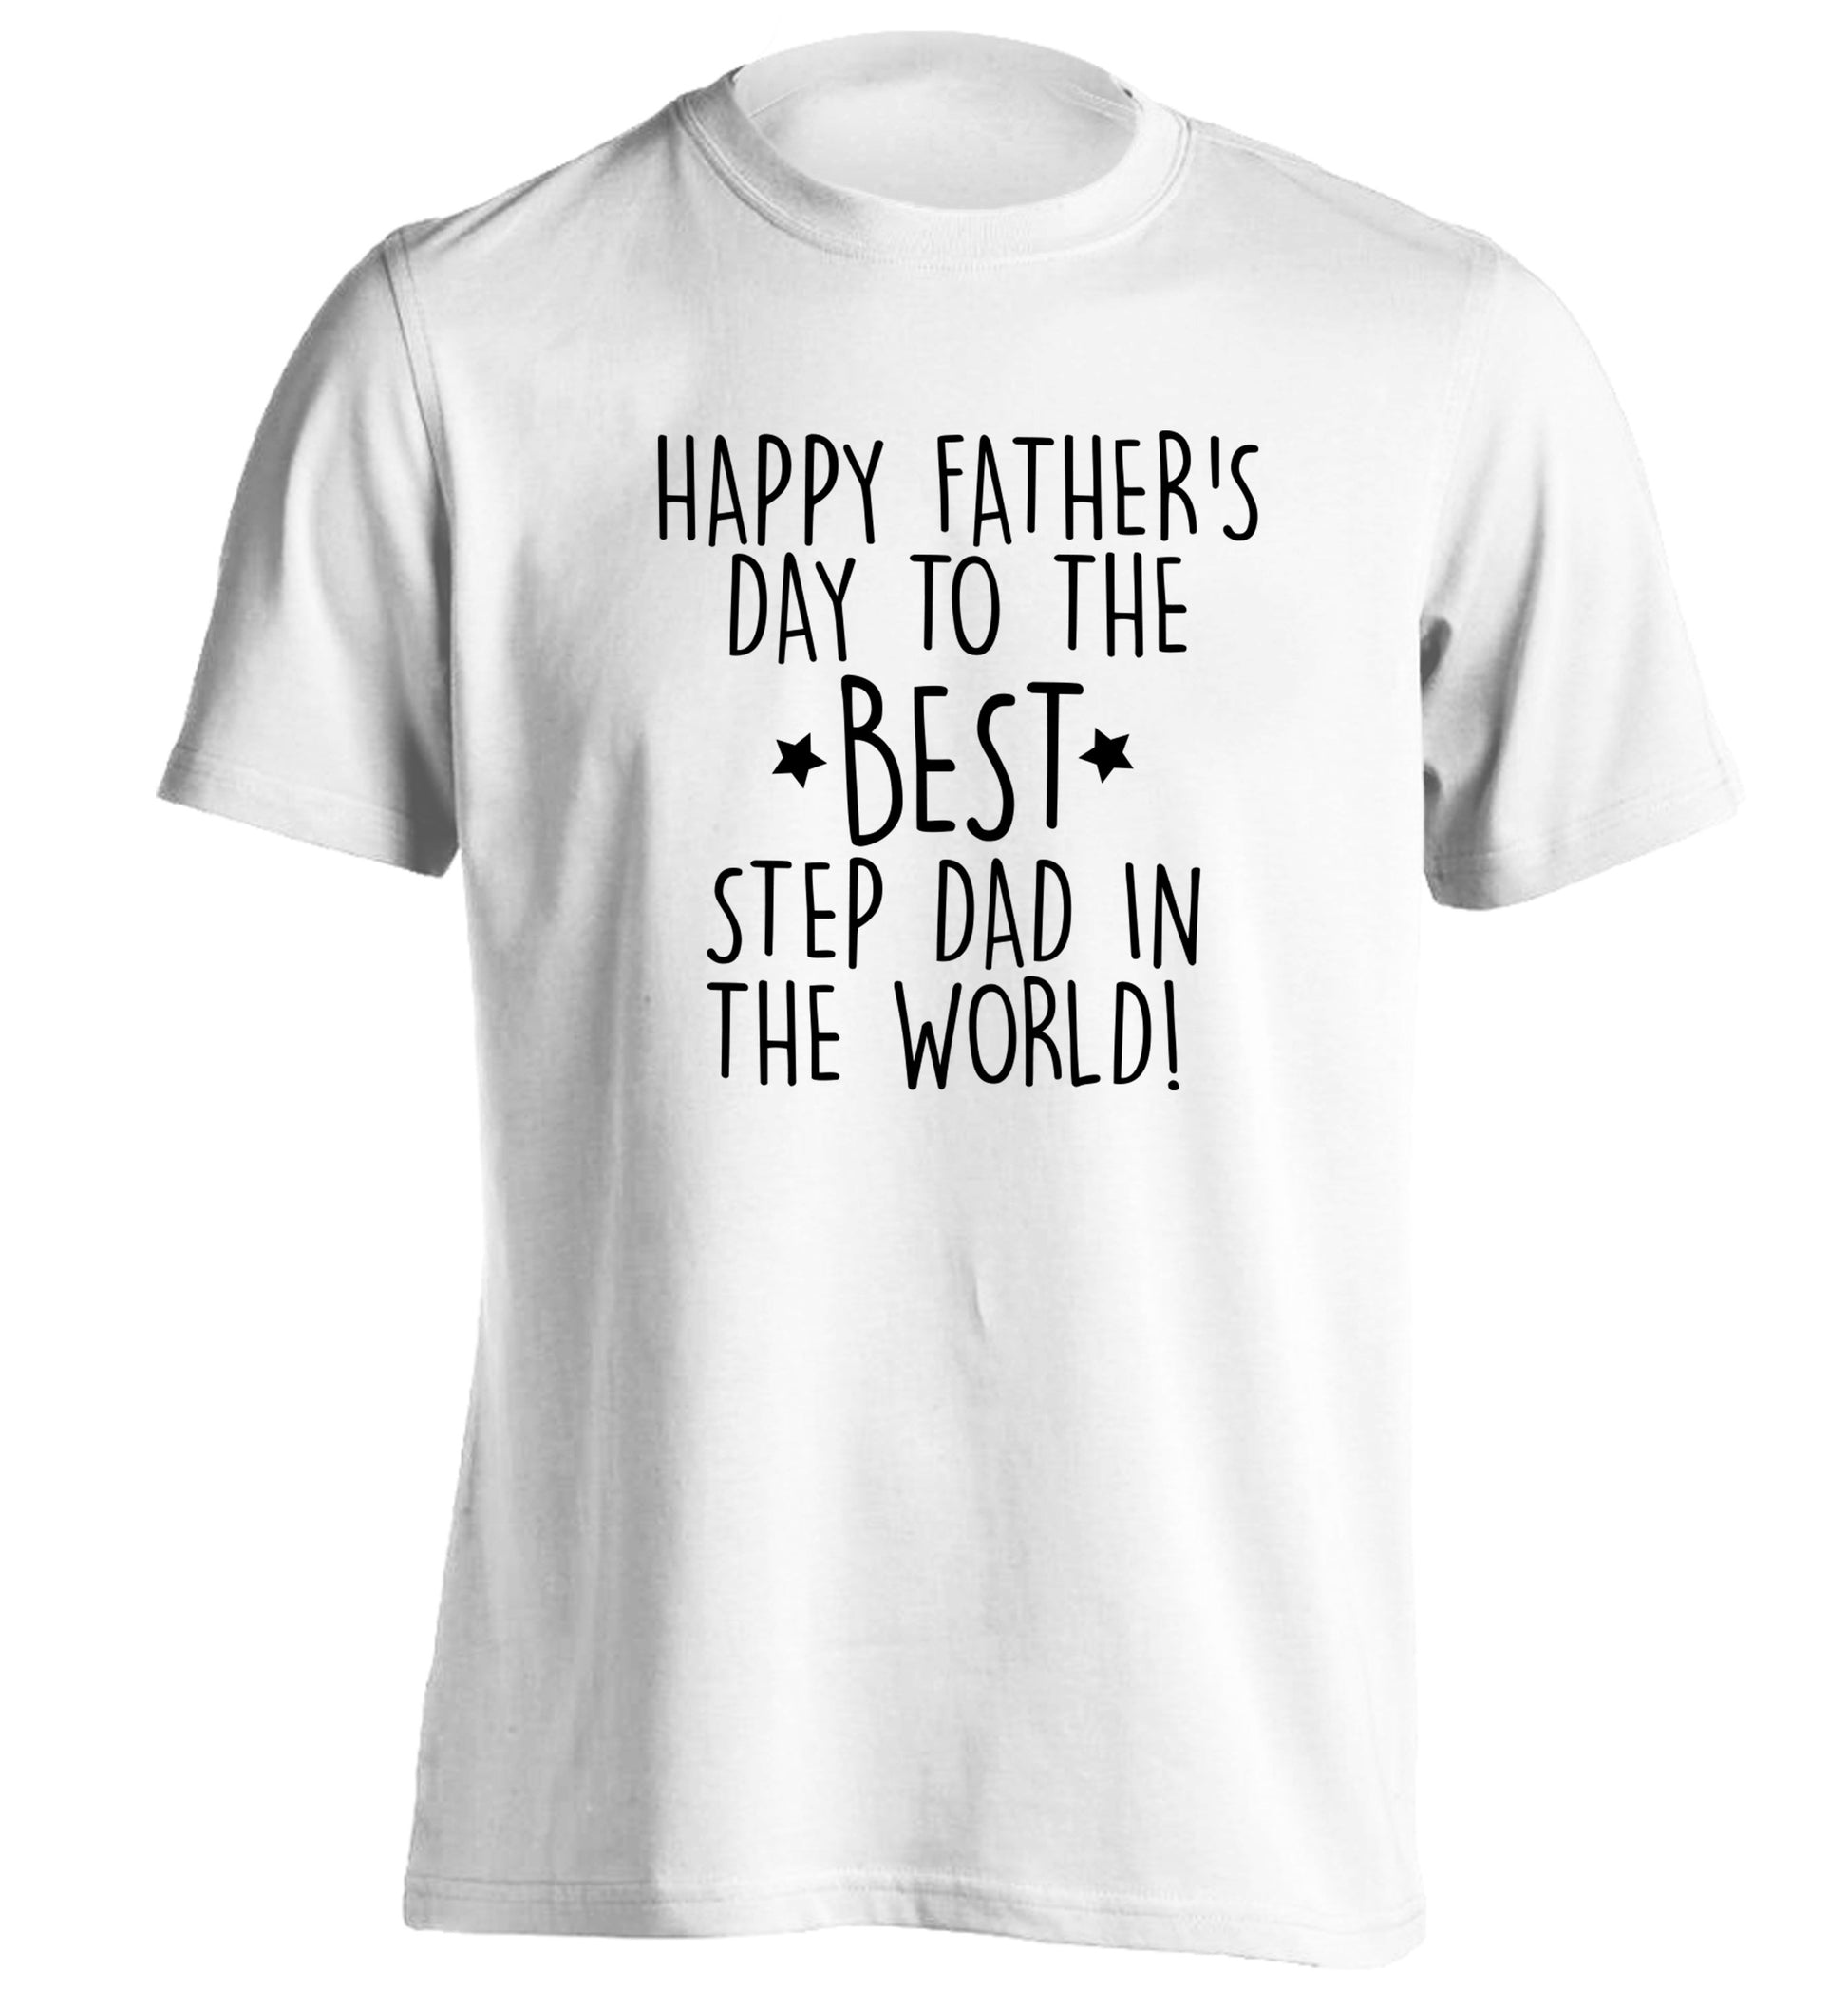 Happy Father's day to the best step dad in the world! adults unisex white Tshirt 2XL